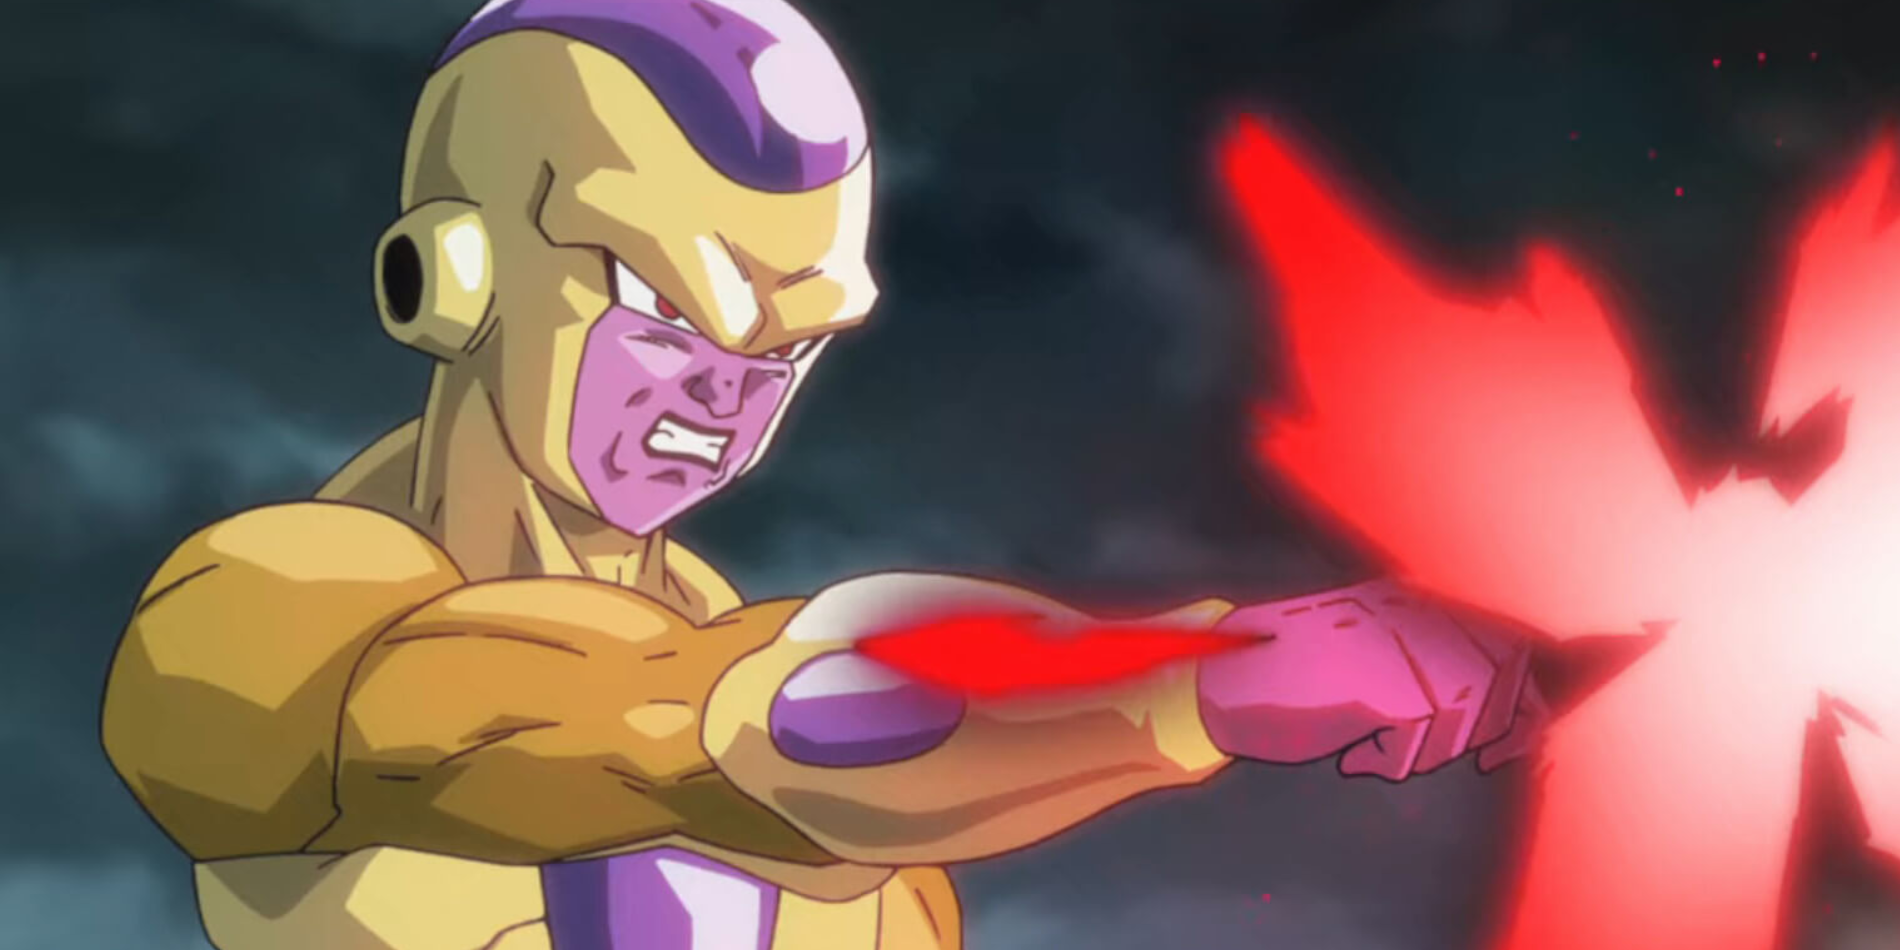 Frieza in his Golden Form